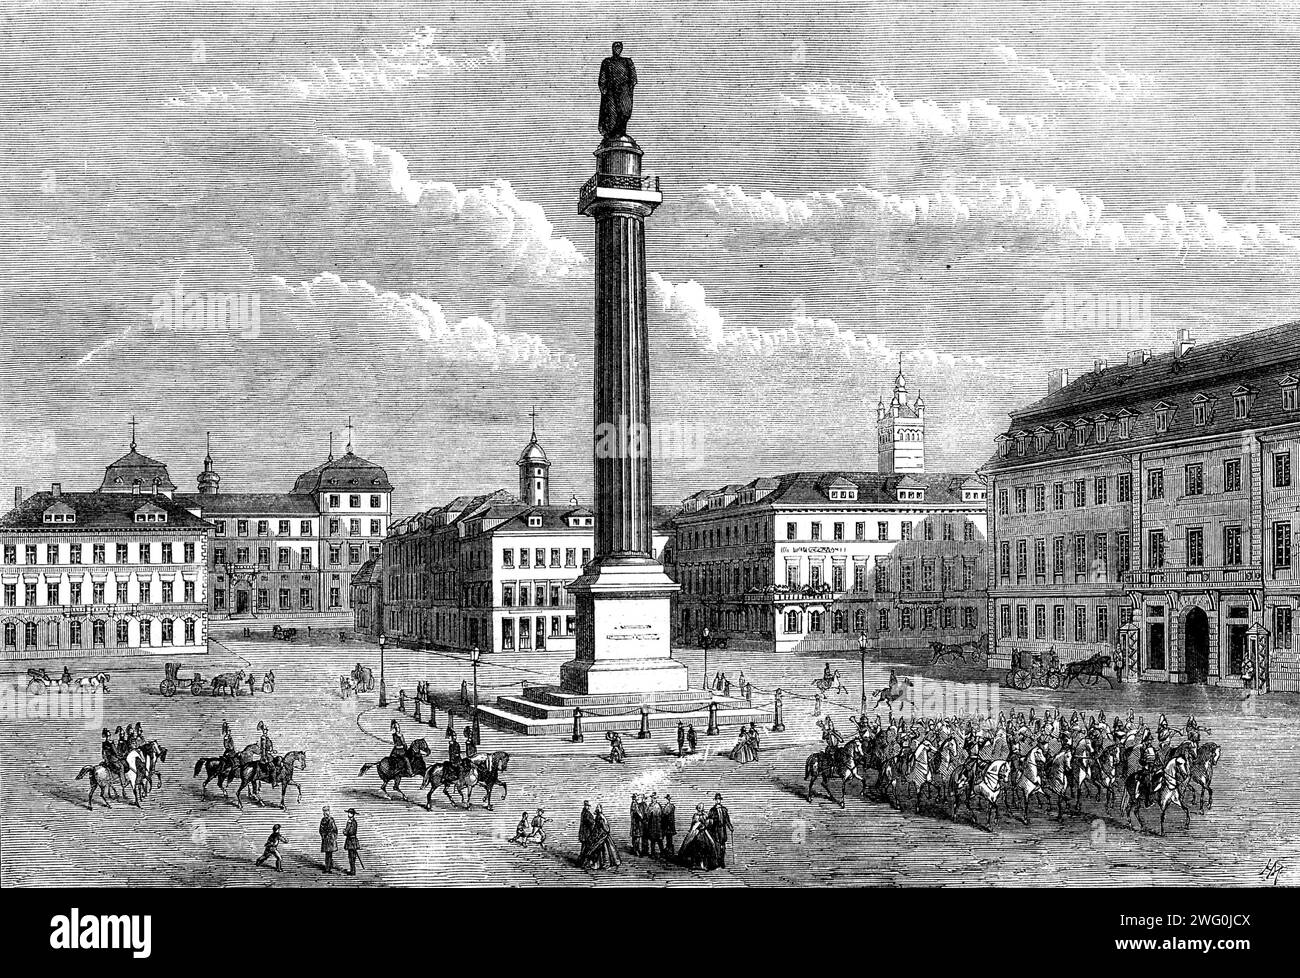 The Louisen Platz (or Square), Darmstadt, [Germany], 1862. 'The Grand Ducal Palace, the Ludwig Monument, the Hotel Traube, palace occupied by Prince and Princess Louis...the finest public square [is] the Louisen Platz. In its centre is a Doric column surmounted by a statue of Duke Louis I...Around it are a number of lofty and elegant mansions, among others the new palace, the residence of the Grand Duke, built at the commencement of the present century, but, though sufficiently commodious, not of much architectural merit. Other buildings deserving of notice are the old palace, a large pile of Stock Photo